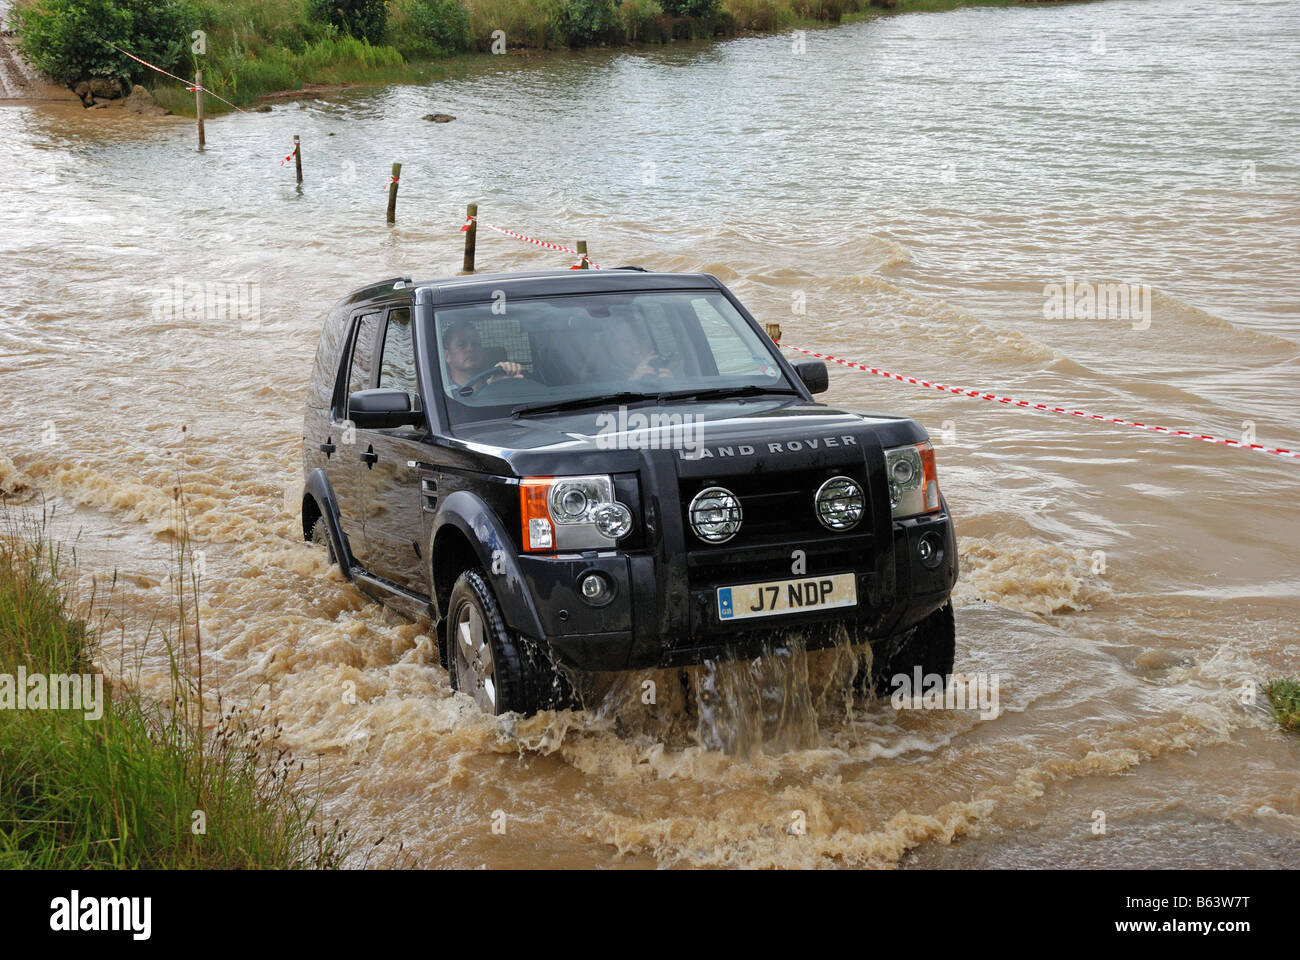 Land Rover Discovery 3 exits the water at Billing 2008 4WD Registration number J7 NDP four wheel drive LRM Show Billing 2008 Stock Photo